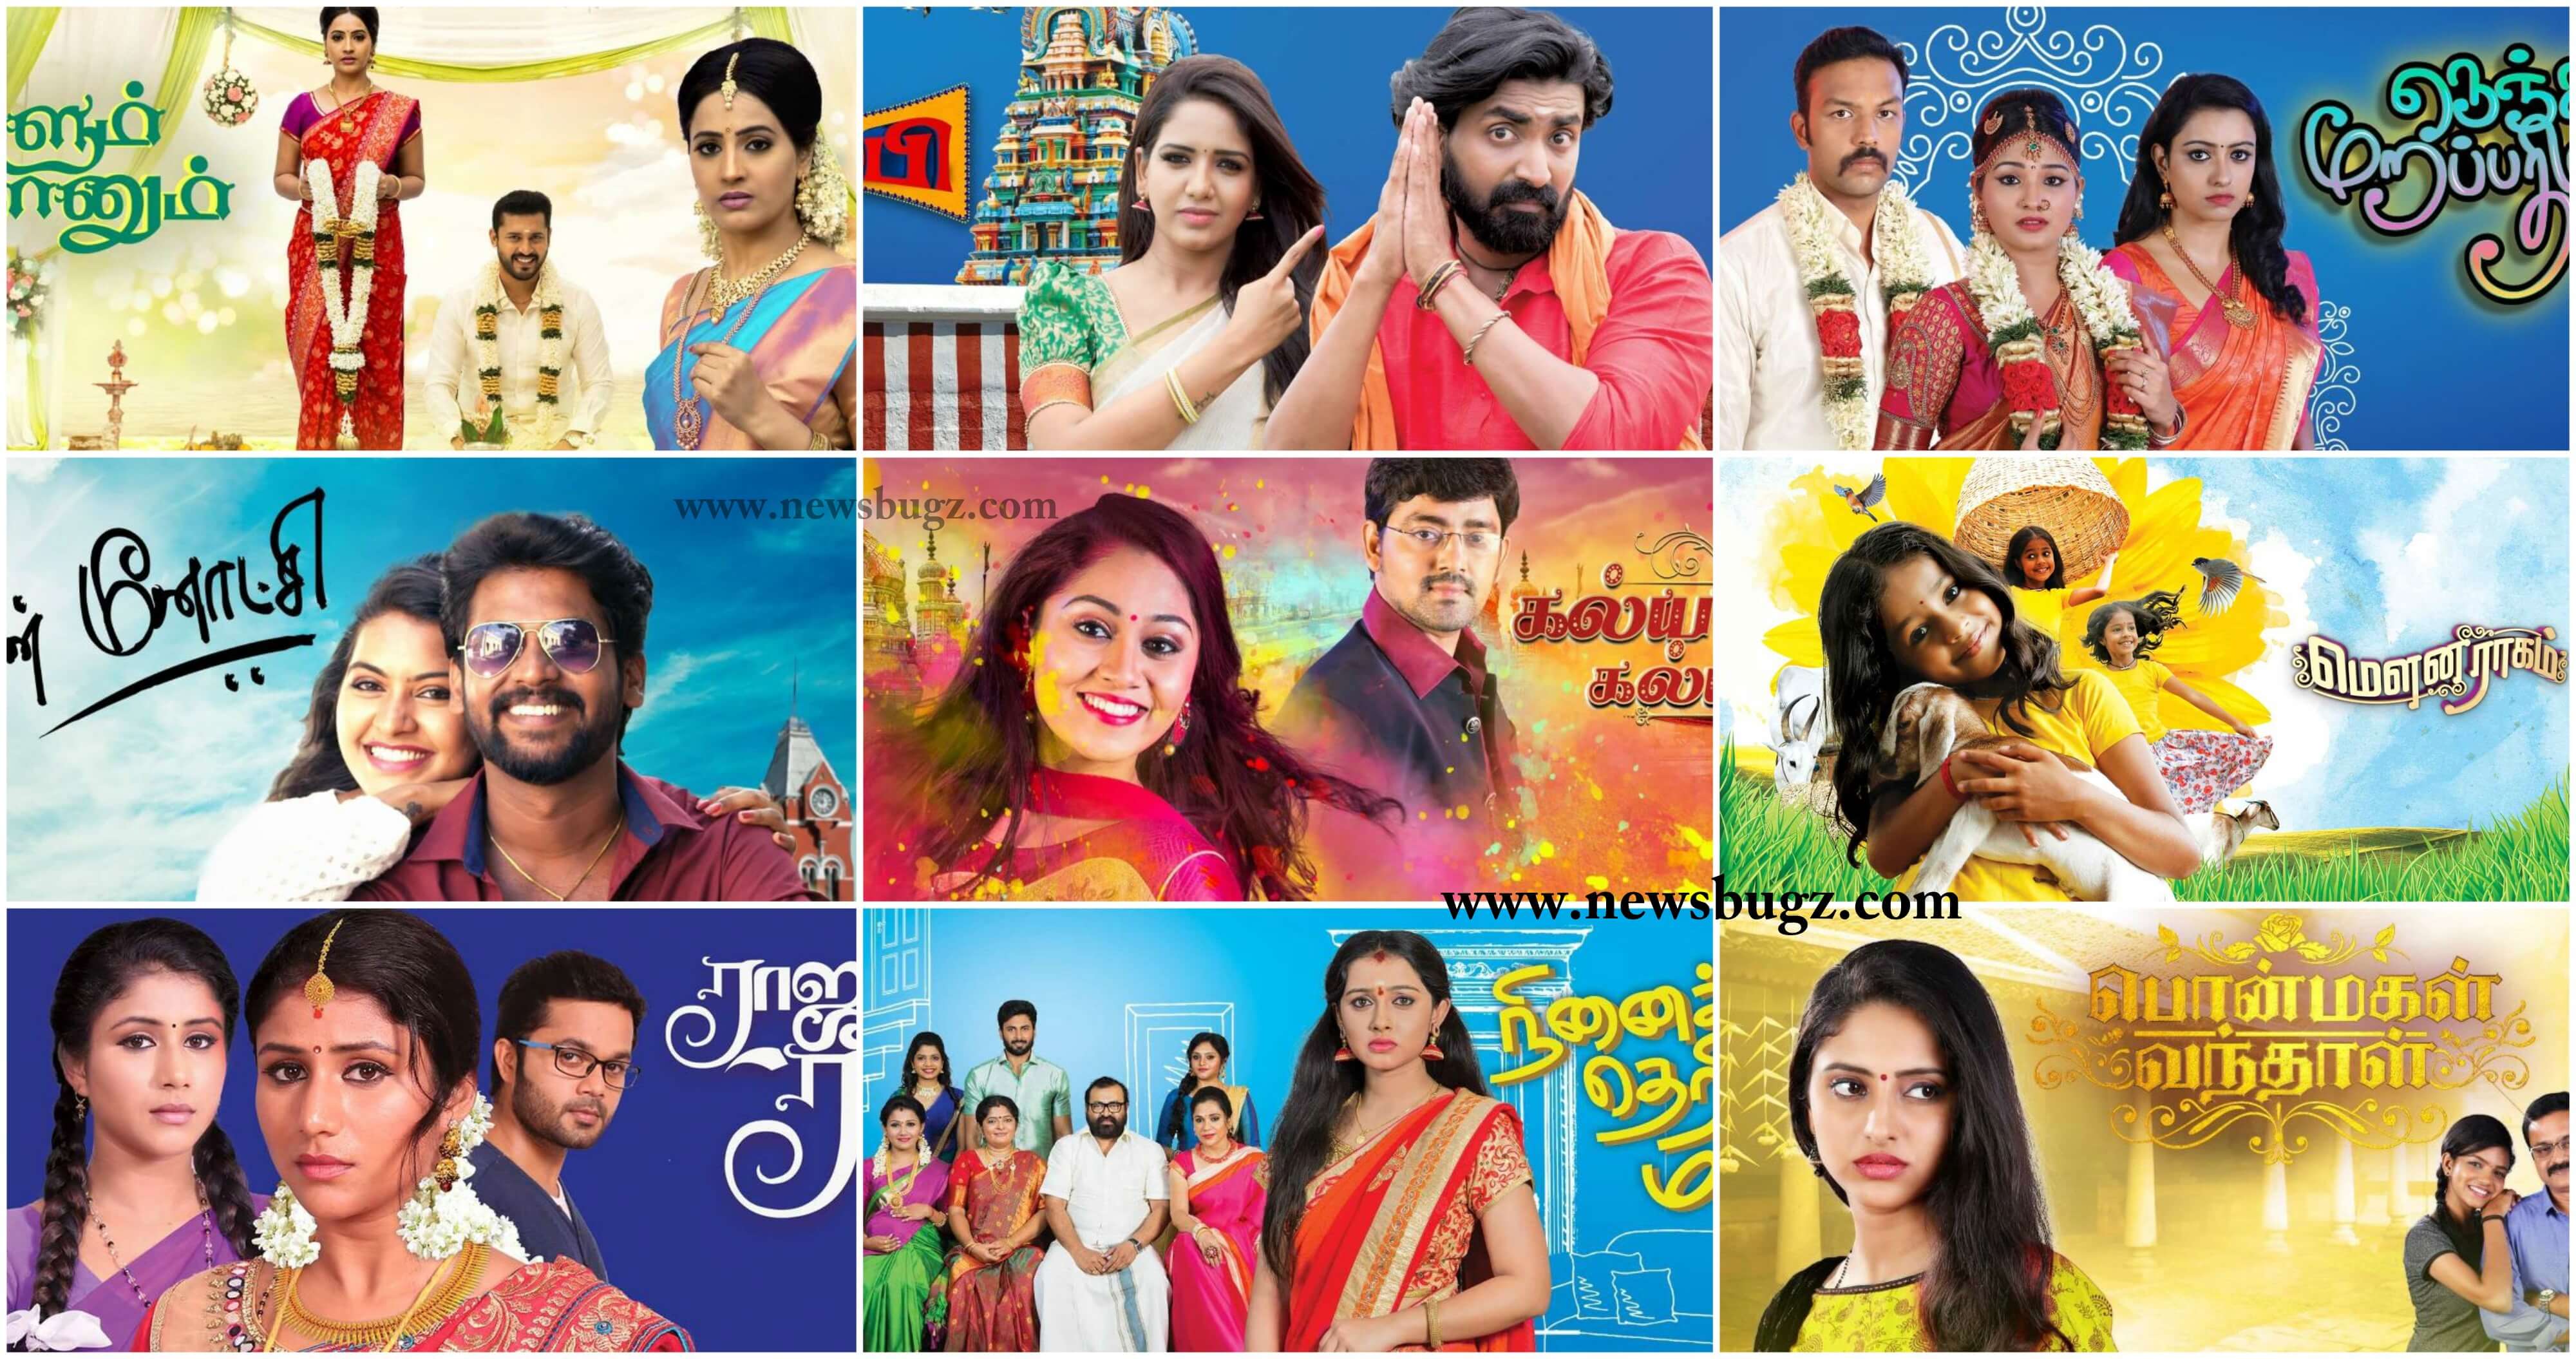 song tv serial free download